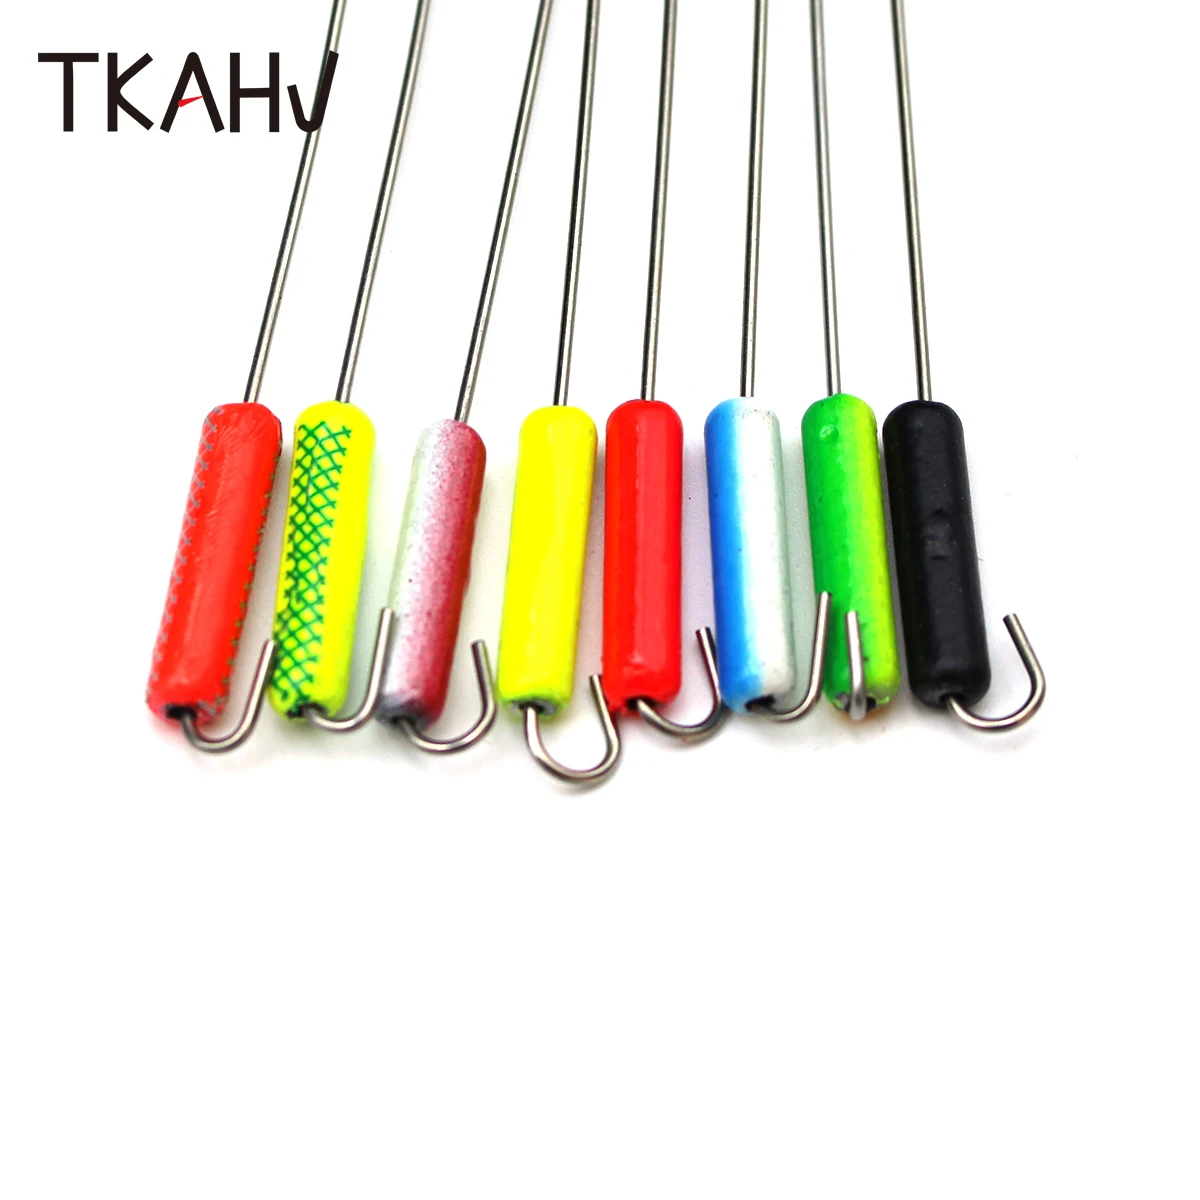  Fishing Hooks with Leader,Deep Drop Rigs,5 Hooks Fishing rig,  Stainless Steel Wire Fishing Leaders with Swivel, Snap, Beads, Leader,Hooks…  : Sports & Outdoors